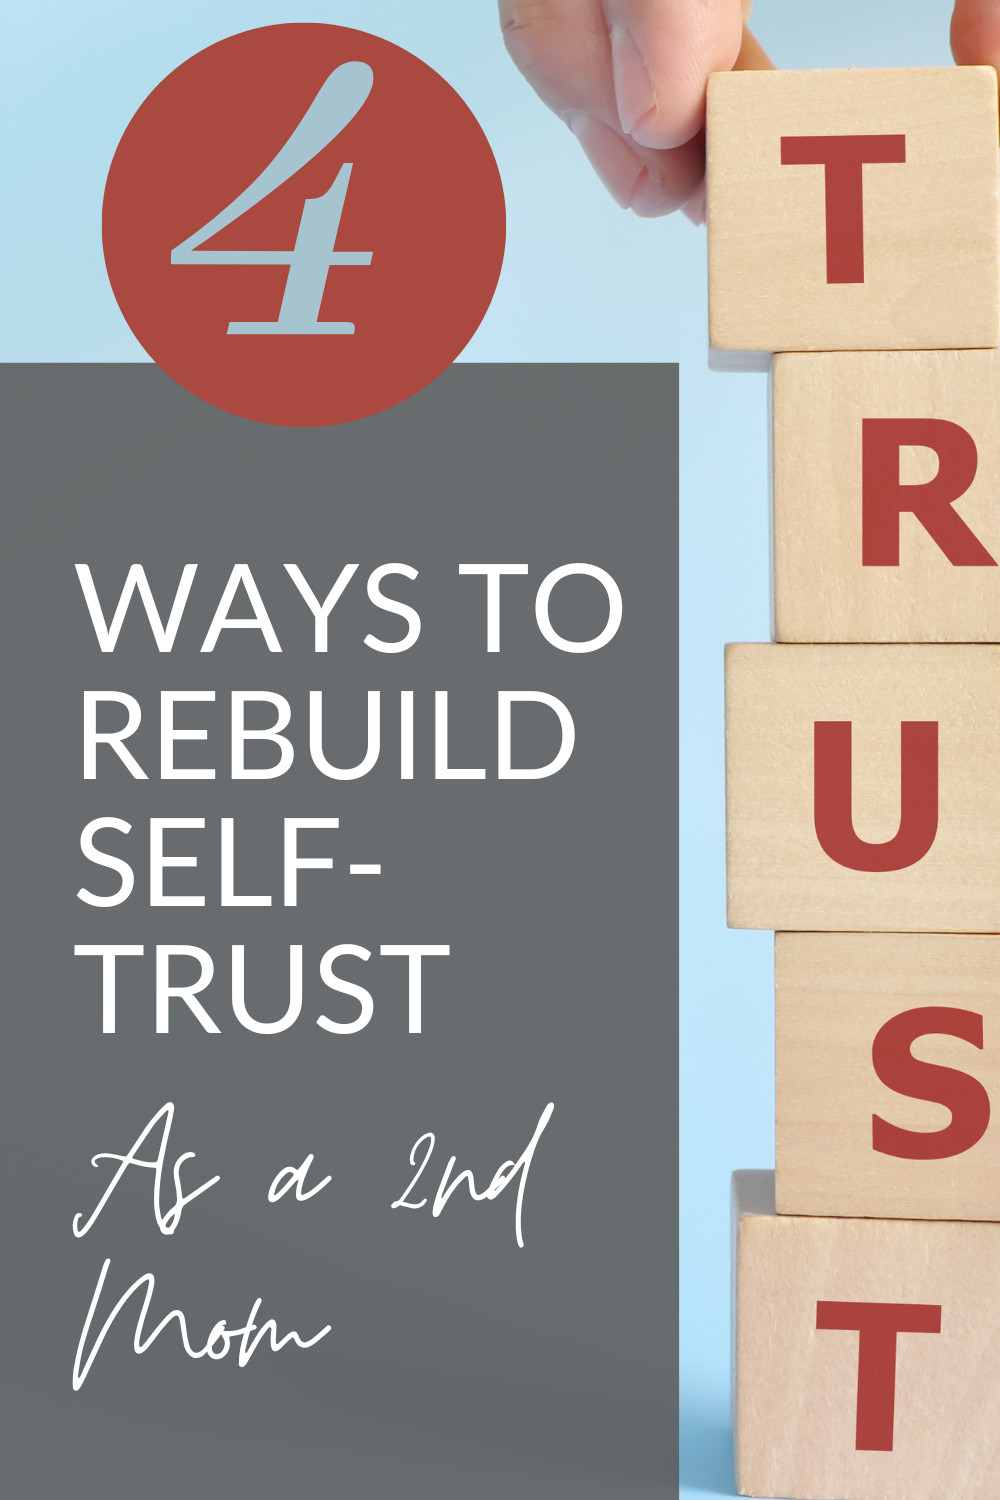 4 Ways to Re-Build Self-Trust for 2nd Moms